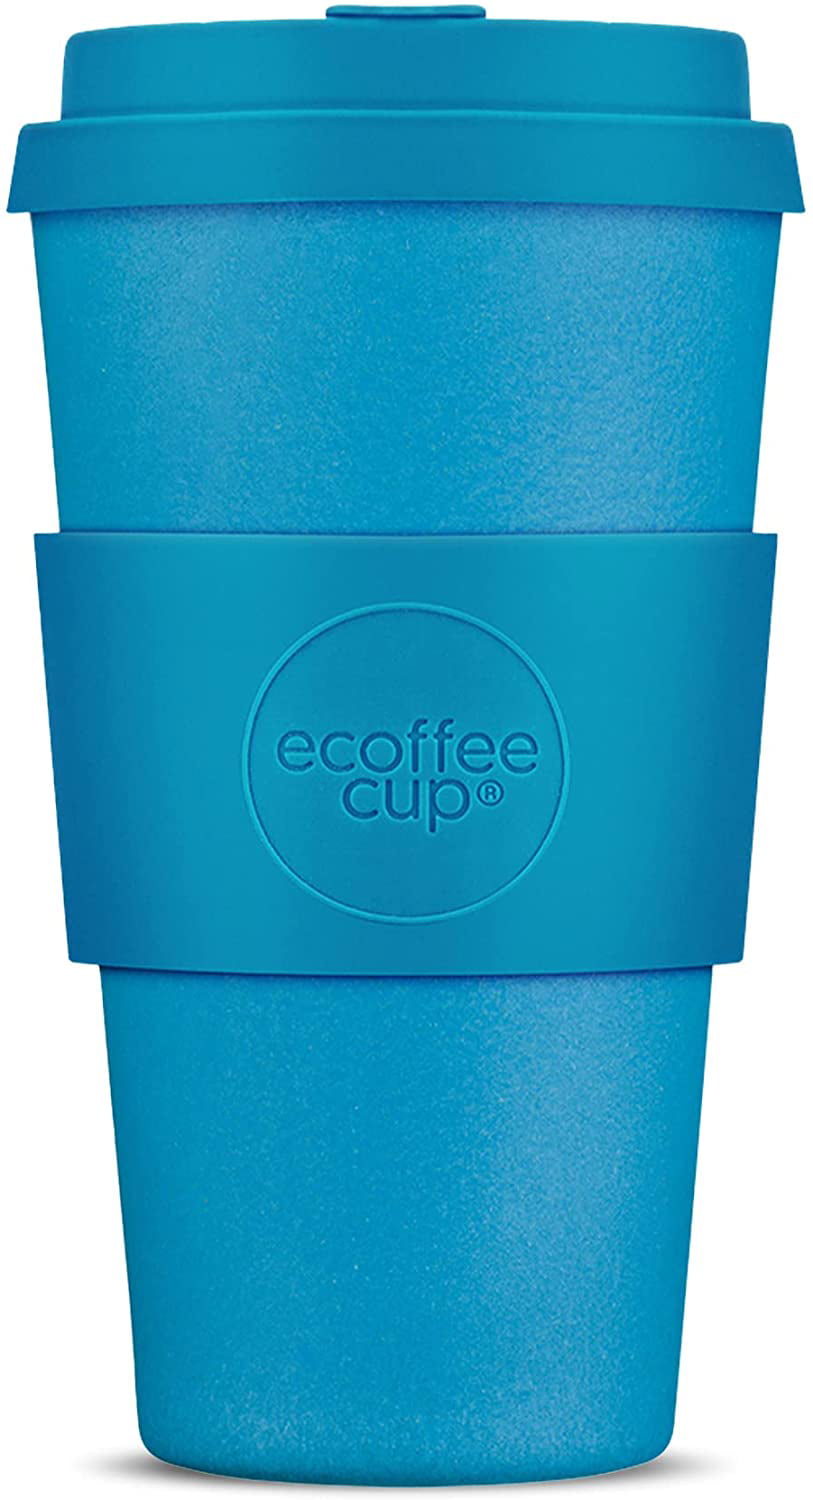 12 oz. Ecoffee Cup Coffee Cup in Blue Bamboo Recyclable & Reusable 